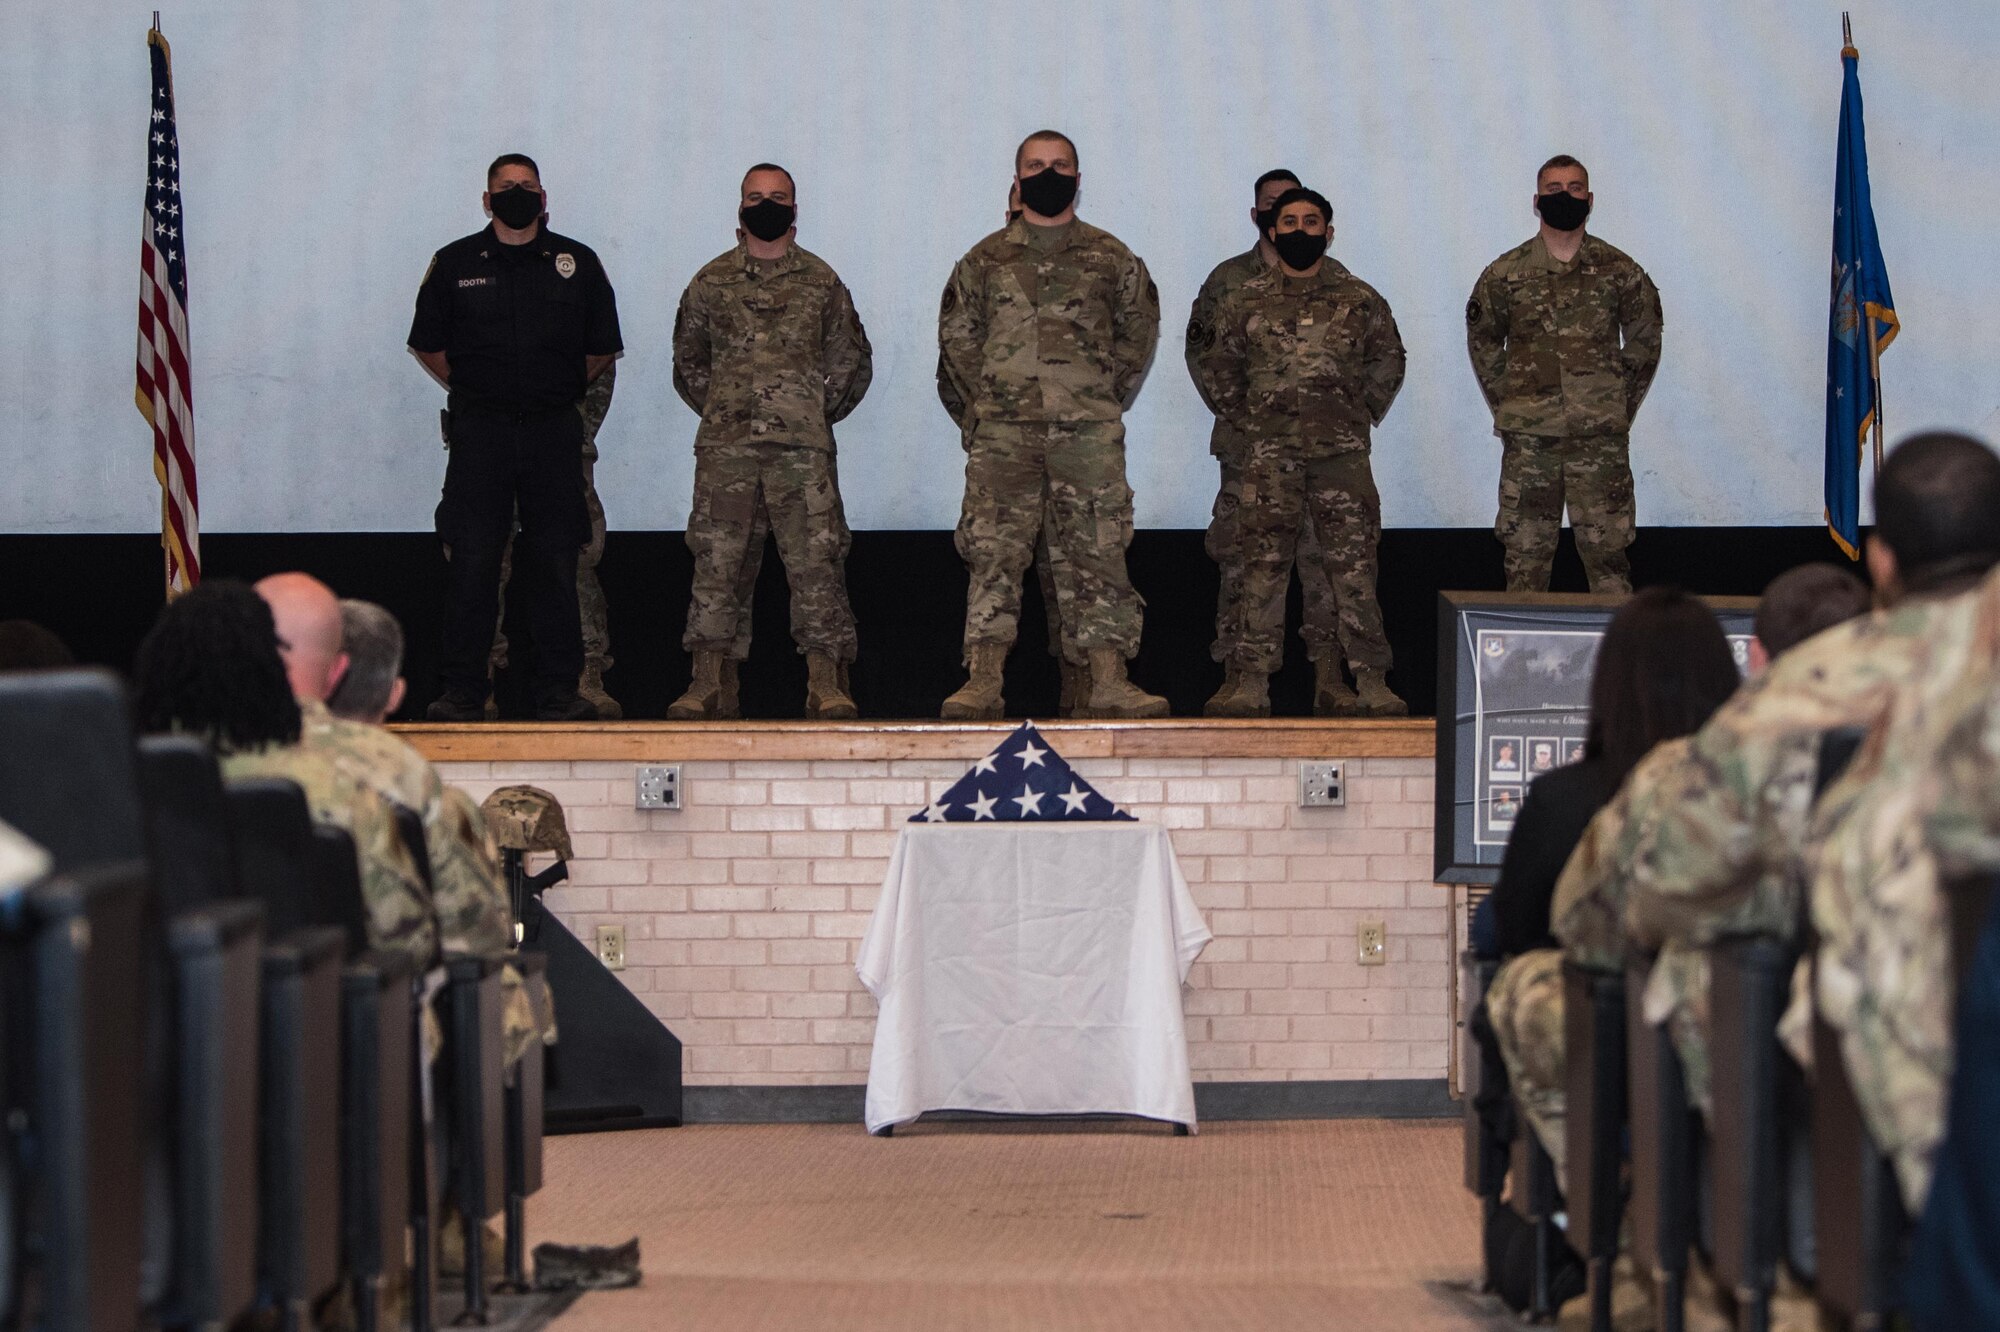 Members of the 22nd Security Forces Squadron stand in formation during a National Police Week Guard Mount ceremony May 14, 2021, at McConnell Air Force Base, Kansas. National Police Week is recognized every year in May to honor those that have sacrificed their lives protecting their communities. (U.S. Air Force photo by Senior Airman Alexi Bosarge)